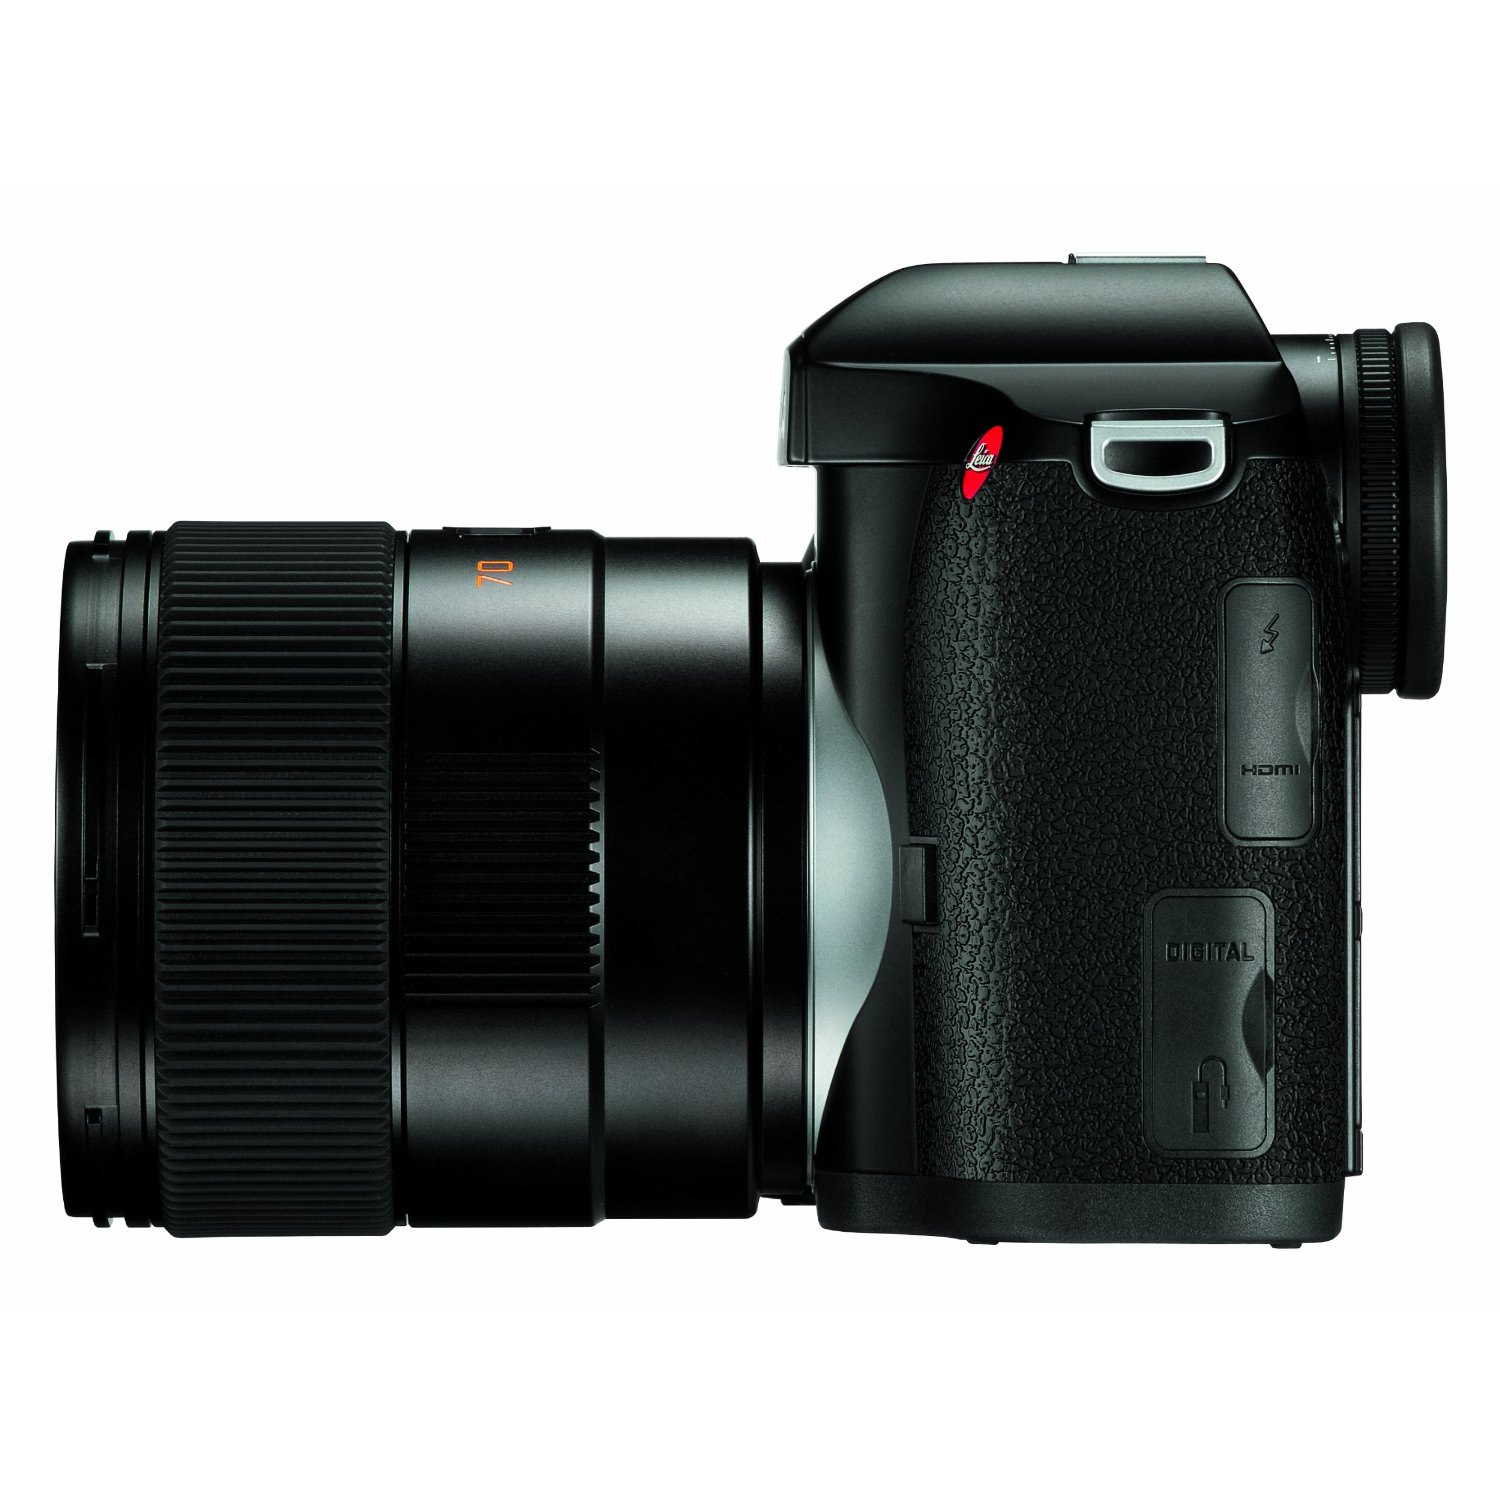 http://thetechjournal.com/wp-content/uploads/images/1109/1316325950-leica-s2-375mp-interchangeable-lens-camera-cost-28000-4.jpg